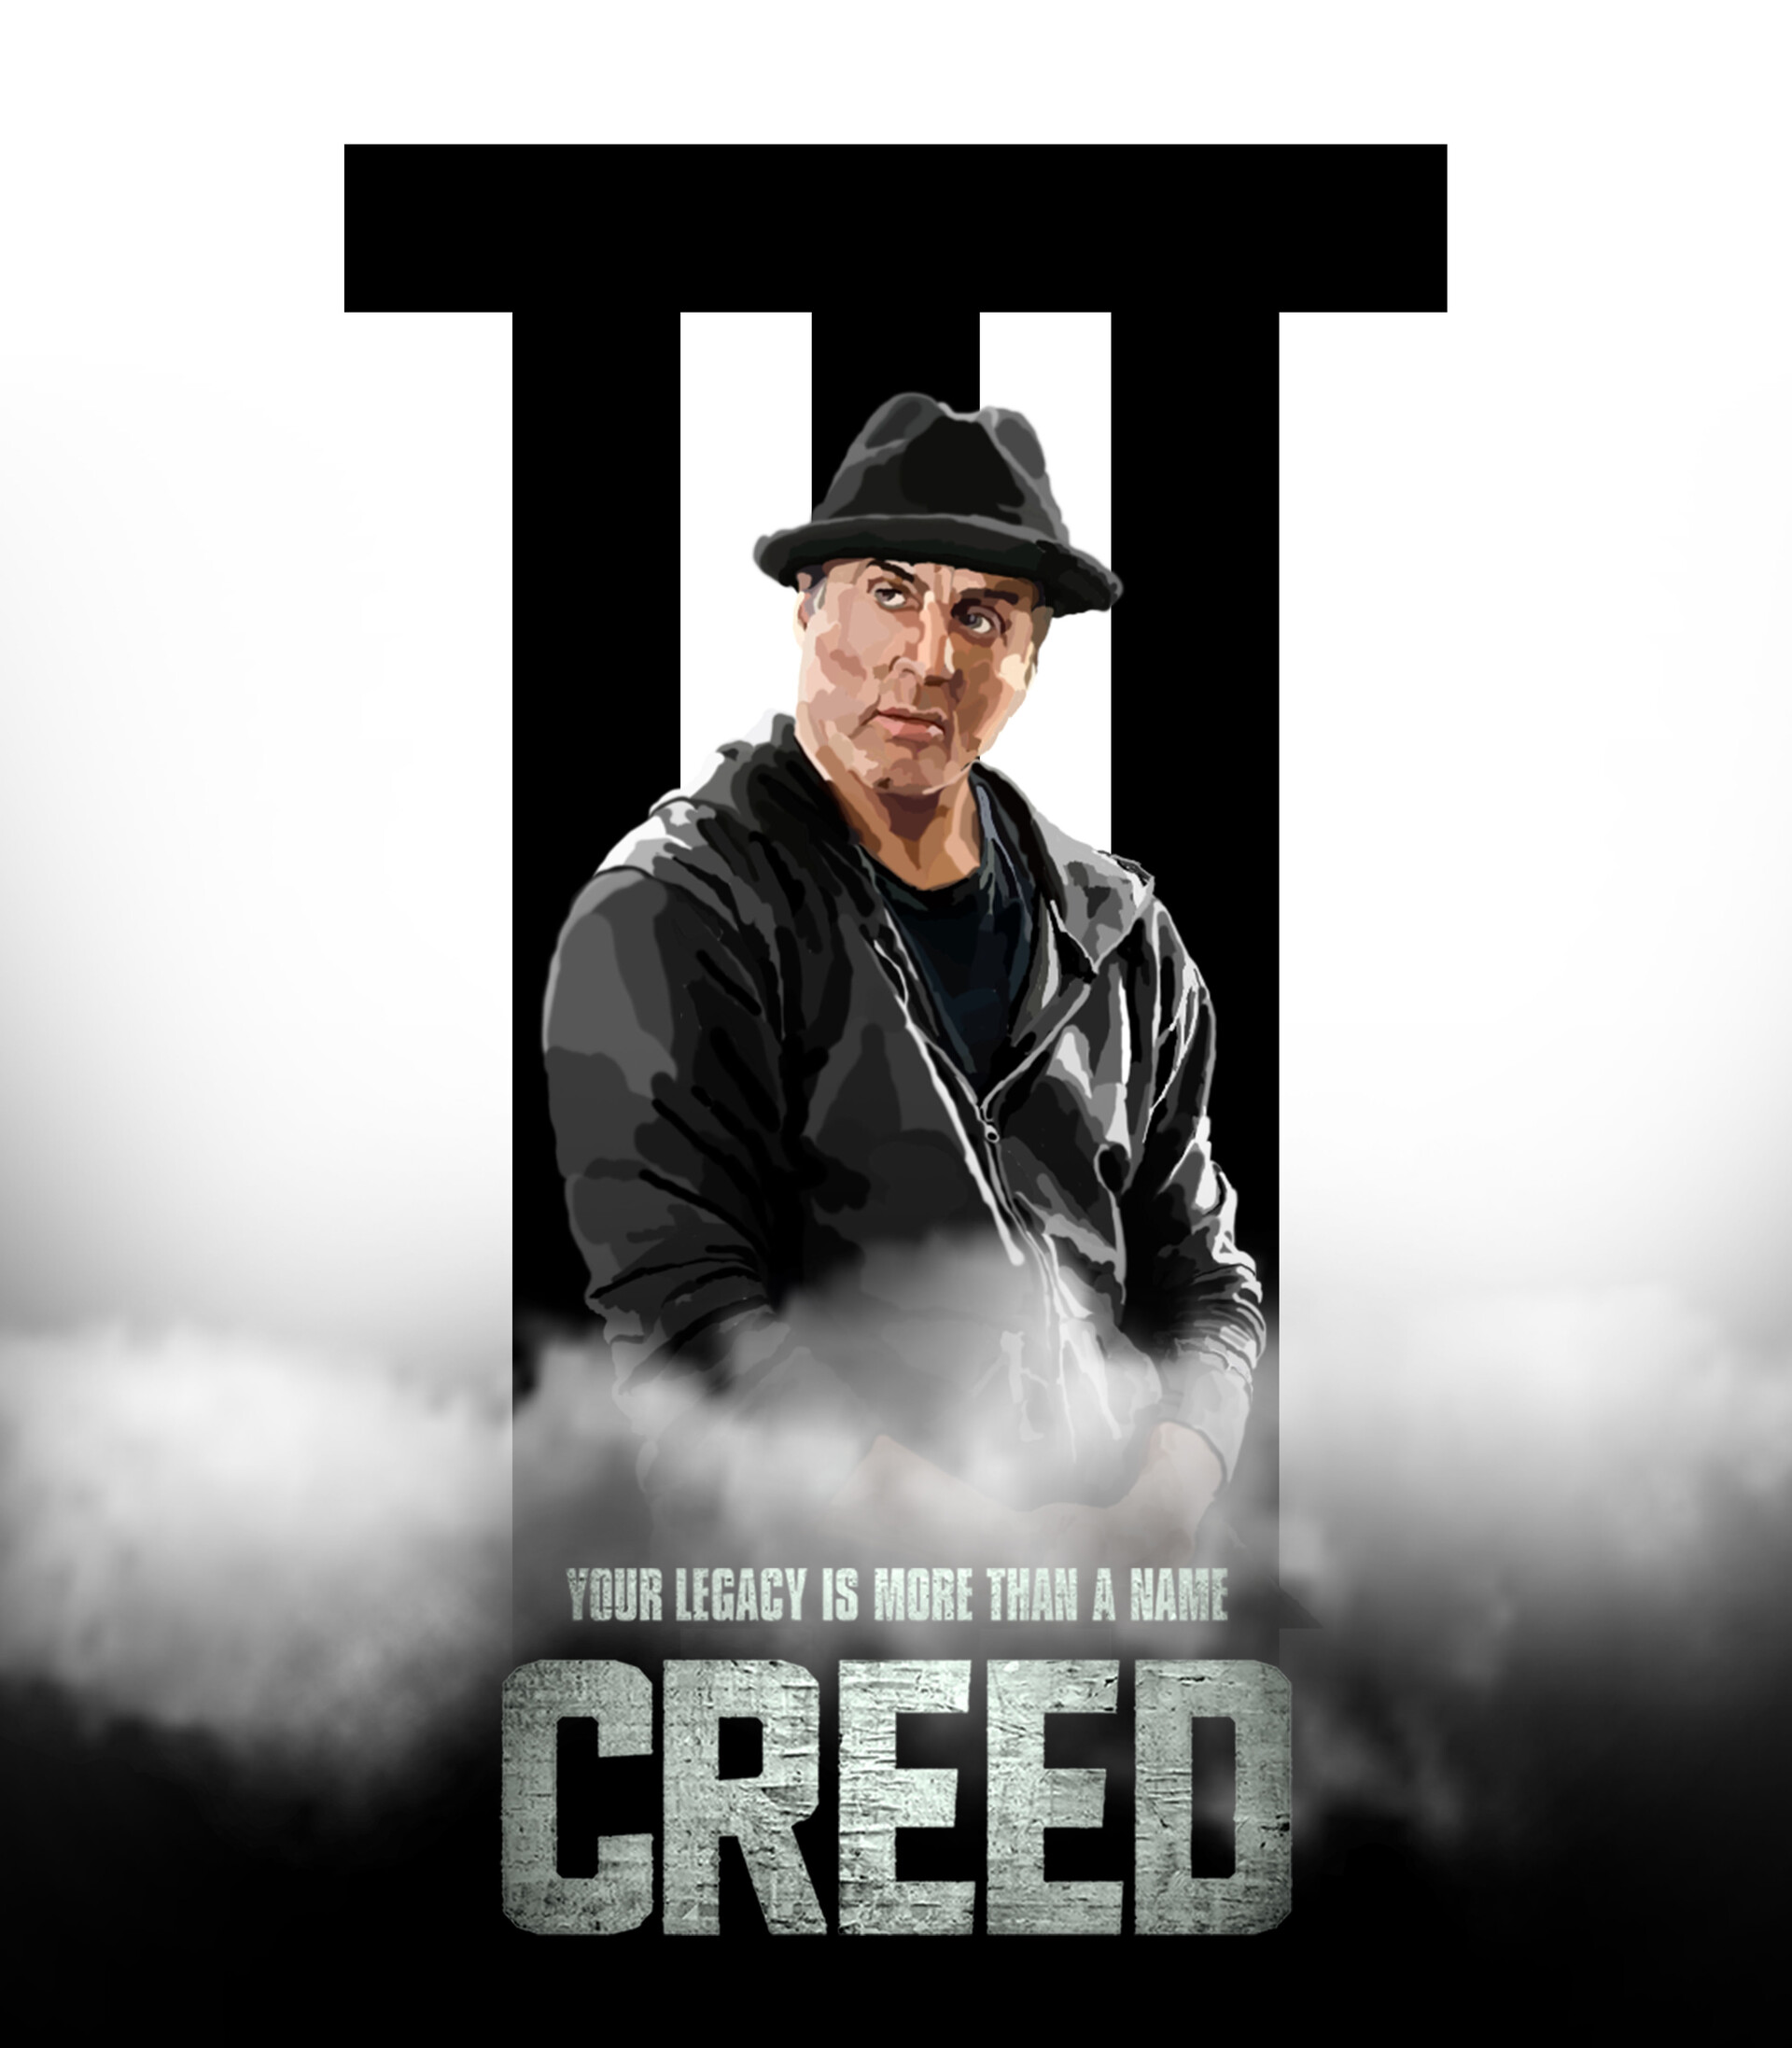 creed 3 poster design